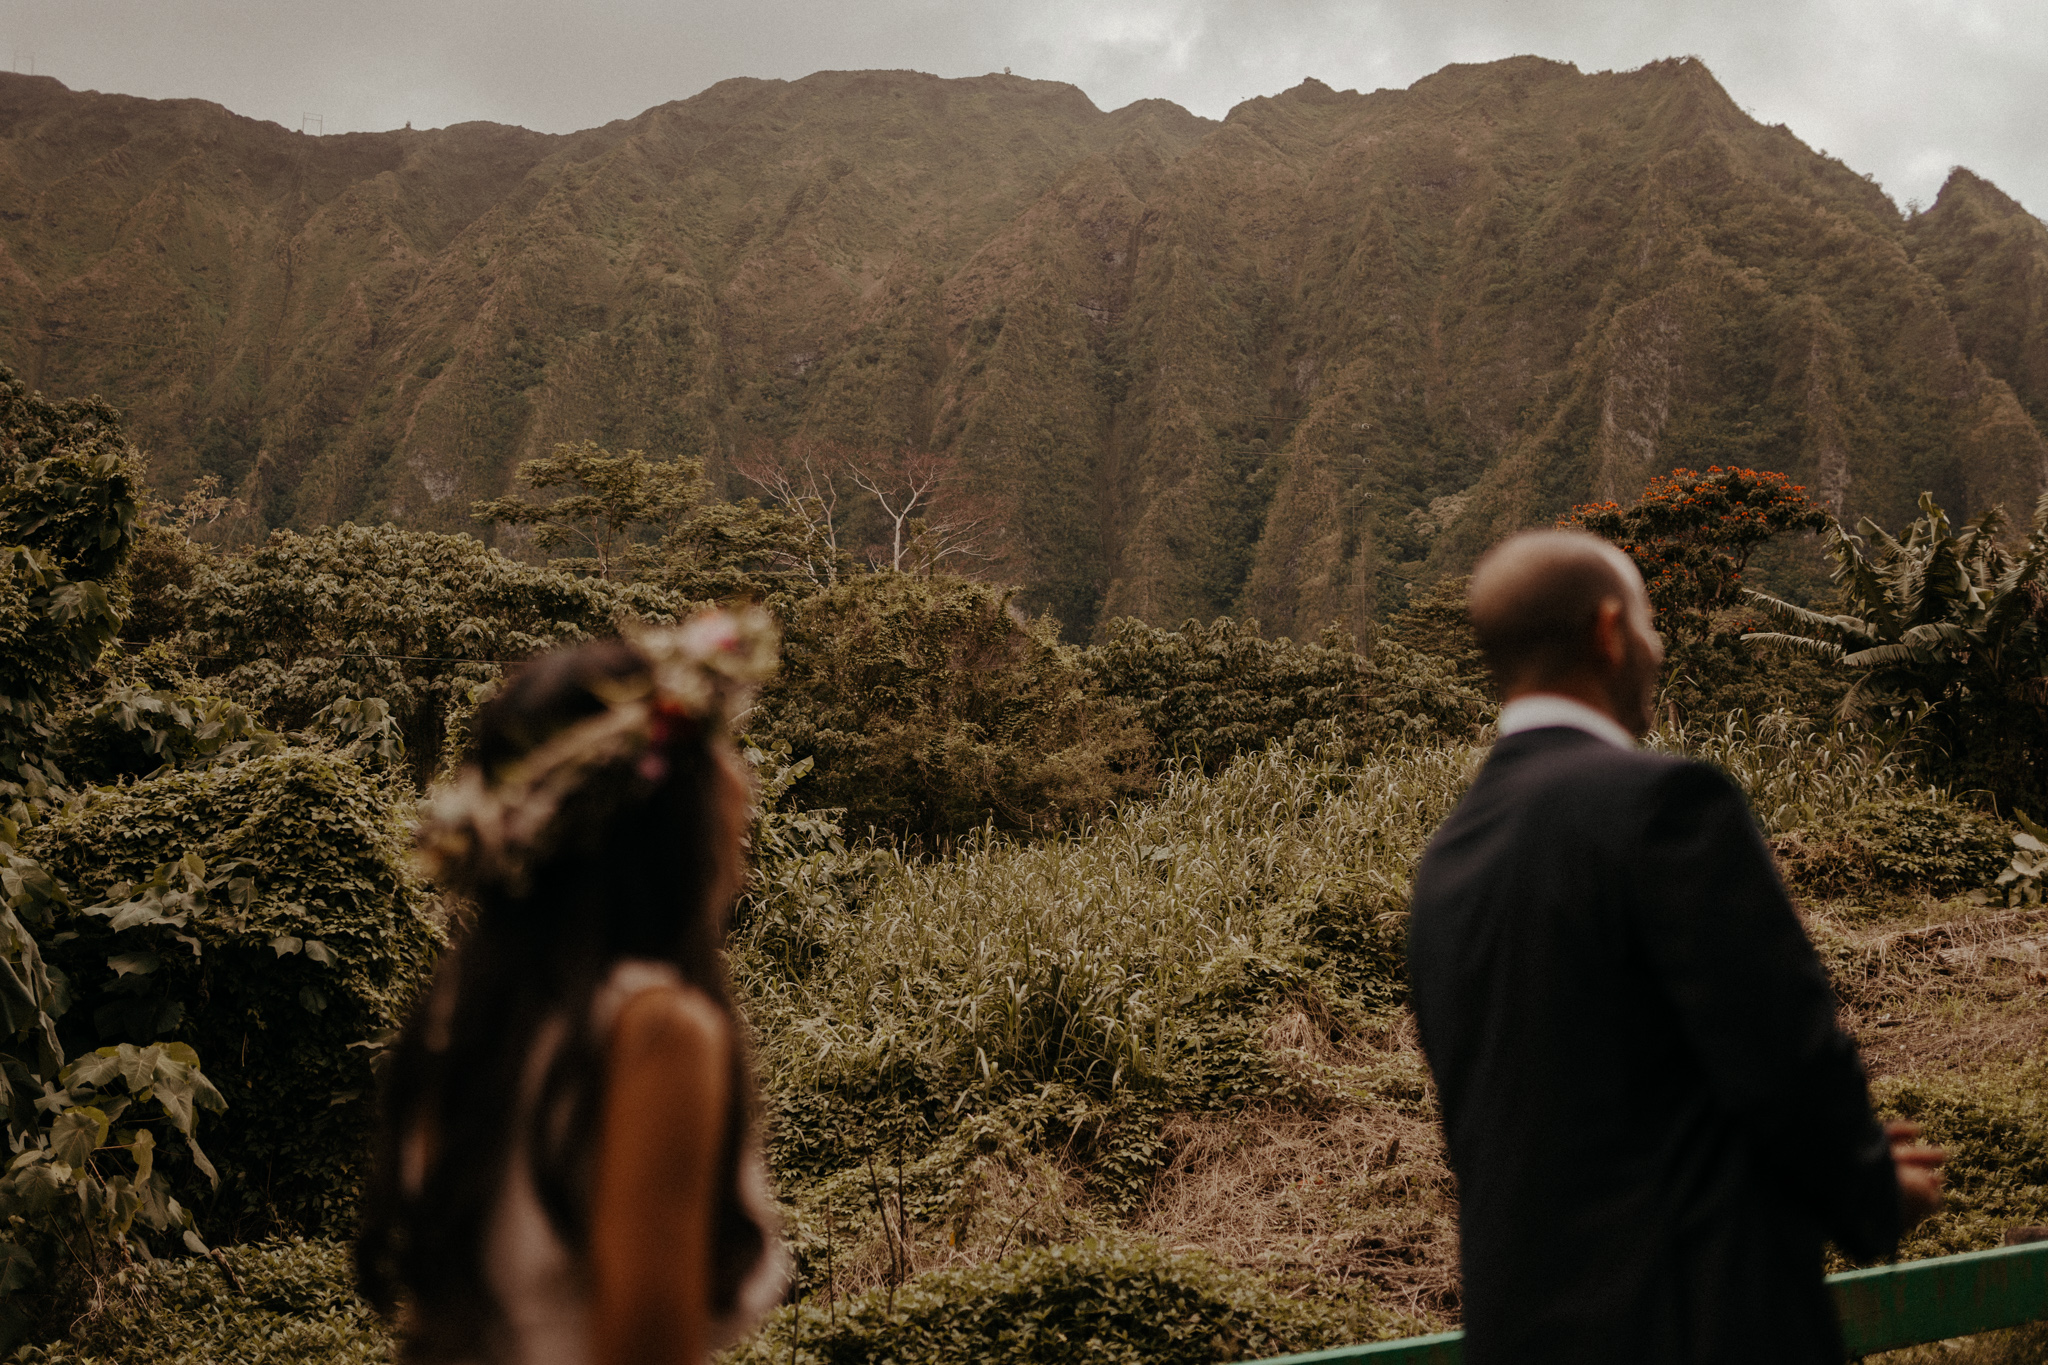 Oahu, Hawaii elopement location with mountains in background and a bridal flower crown called a lei po’o, images by destination wedding photographer Victoria Selman